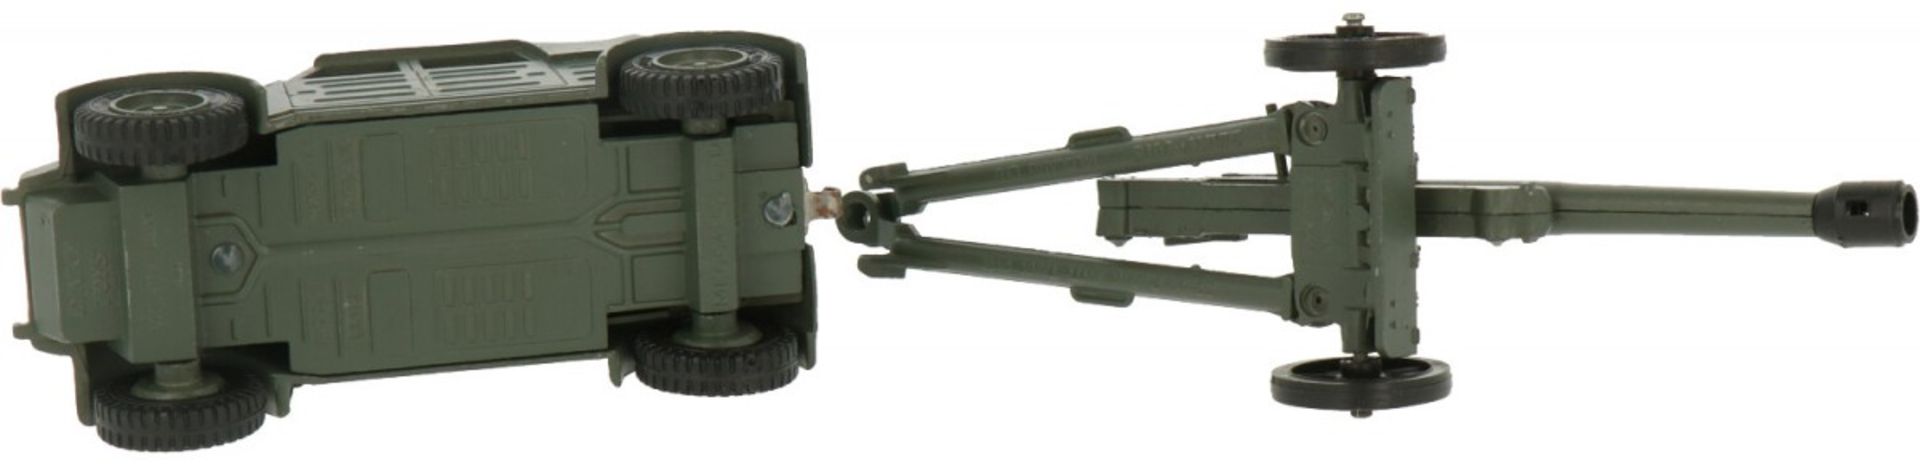 Dinky toys 617 Volkswagen KDF with 50mm P.A.K. anti tank gun - Image 3 of 3